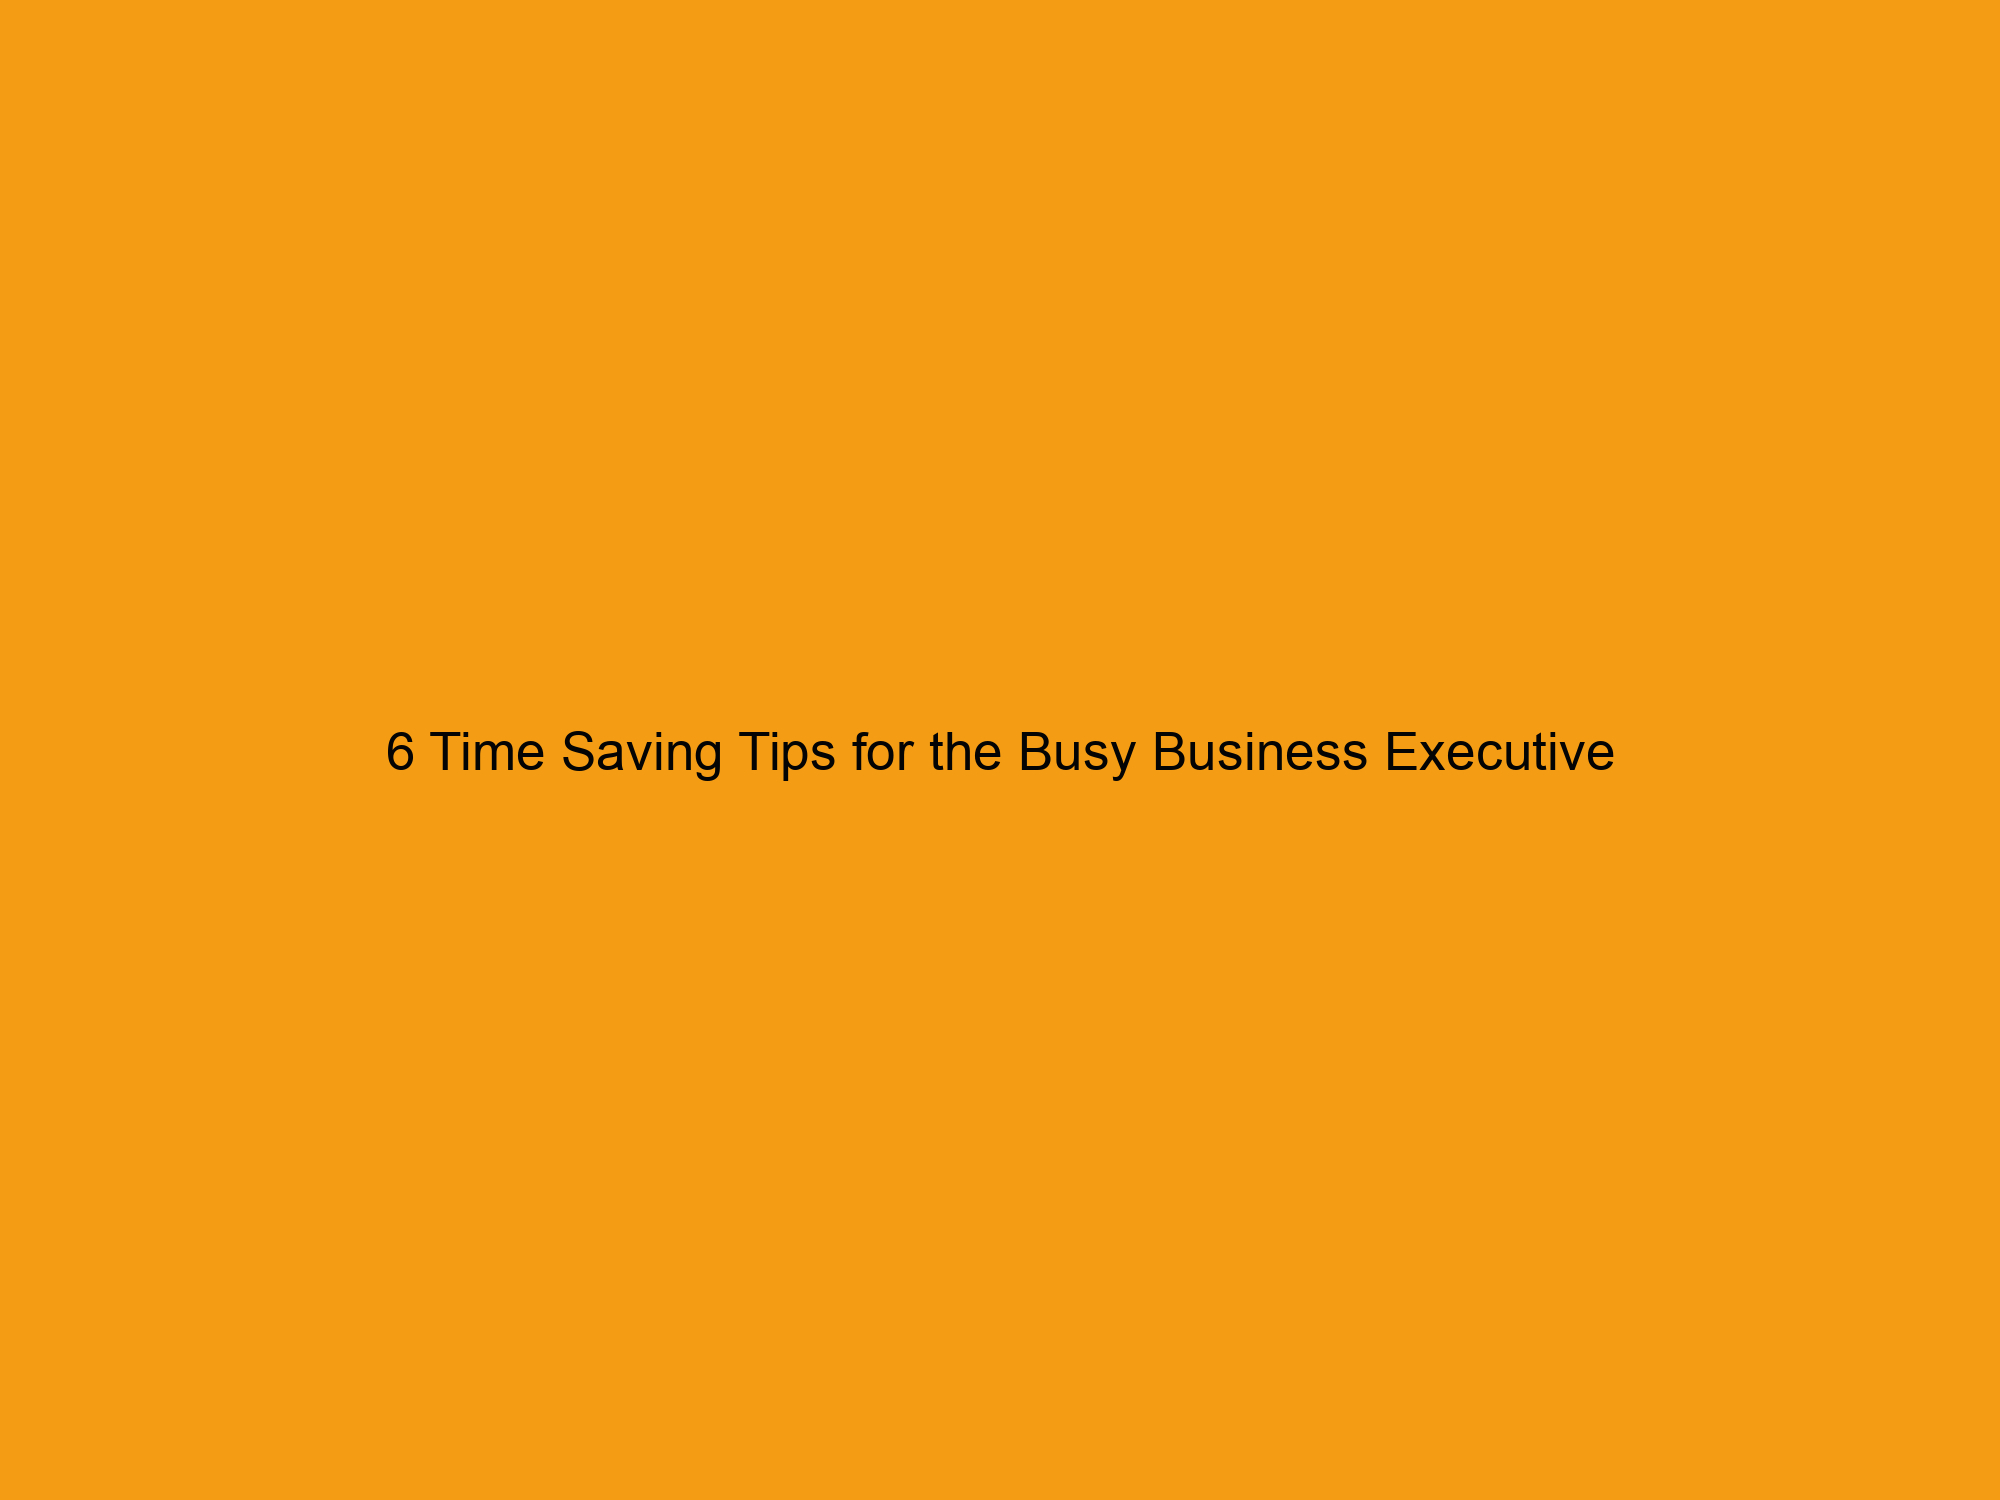 6 Time Saving Tips for the Busy Business Executive